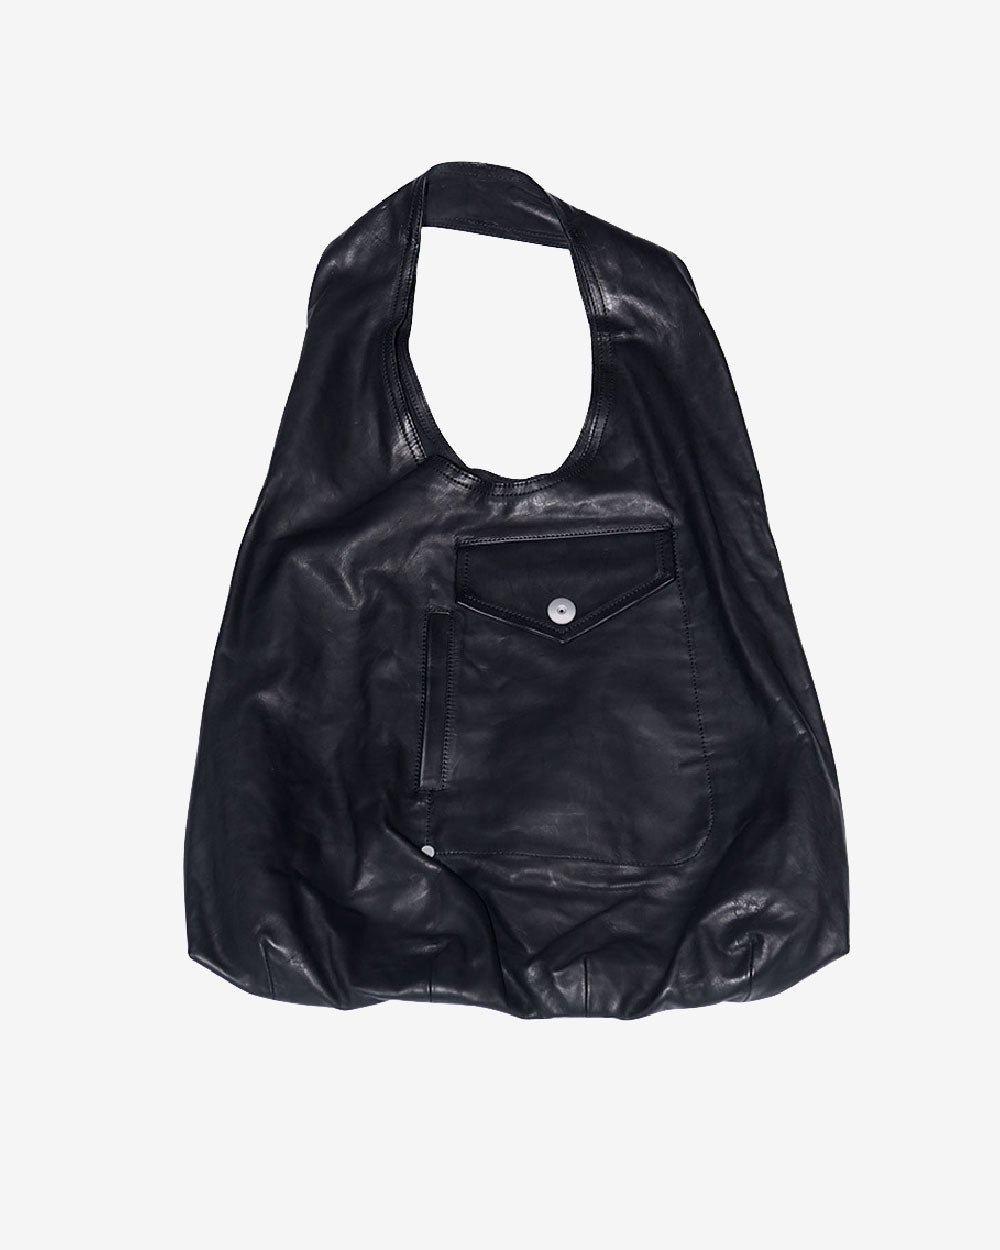 Leather Body Tote Bag